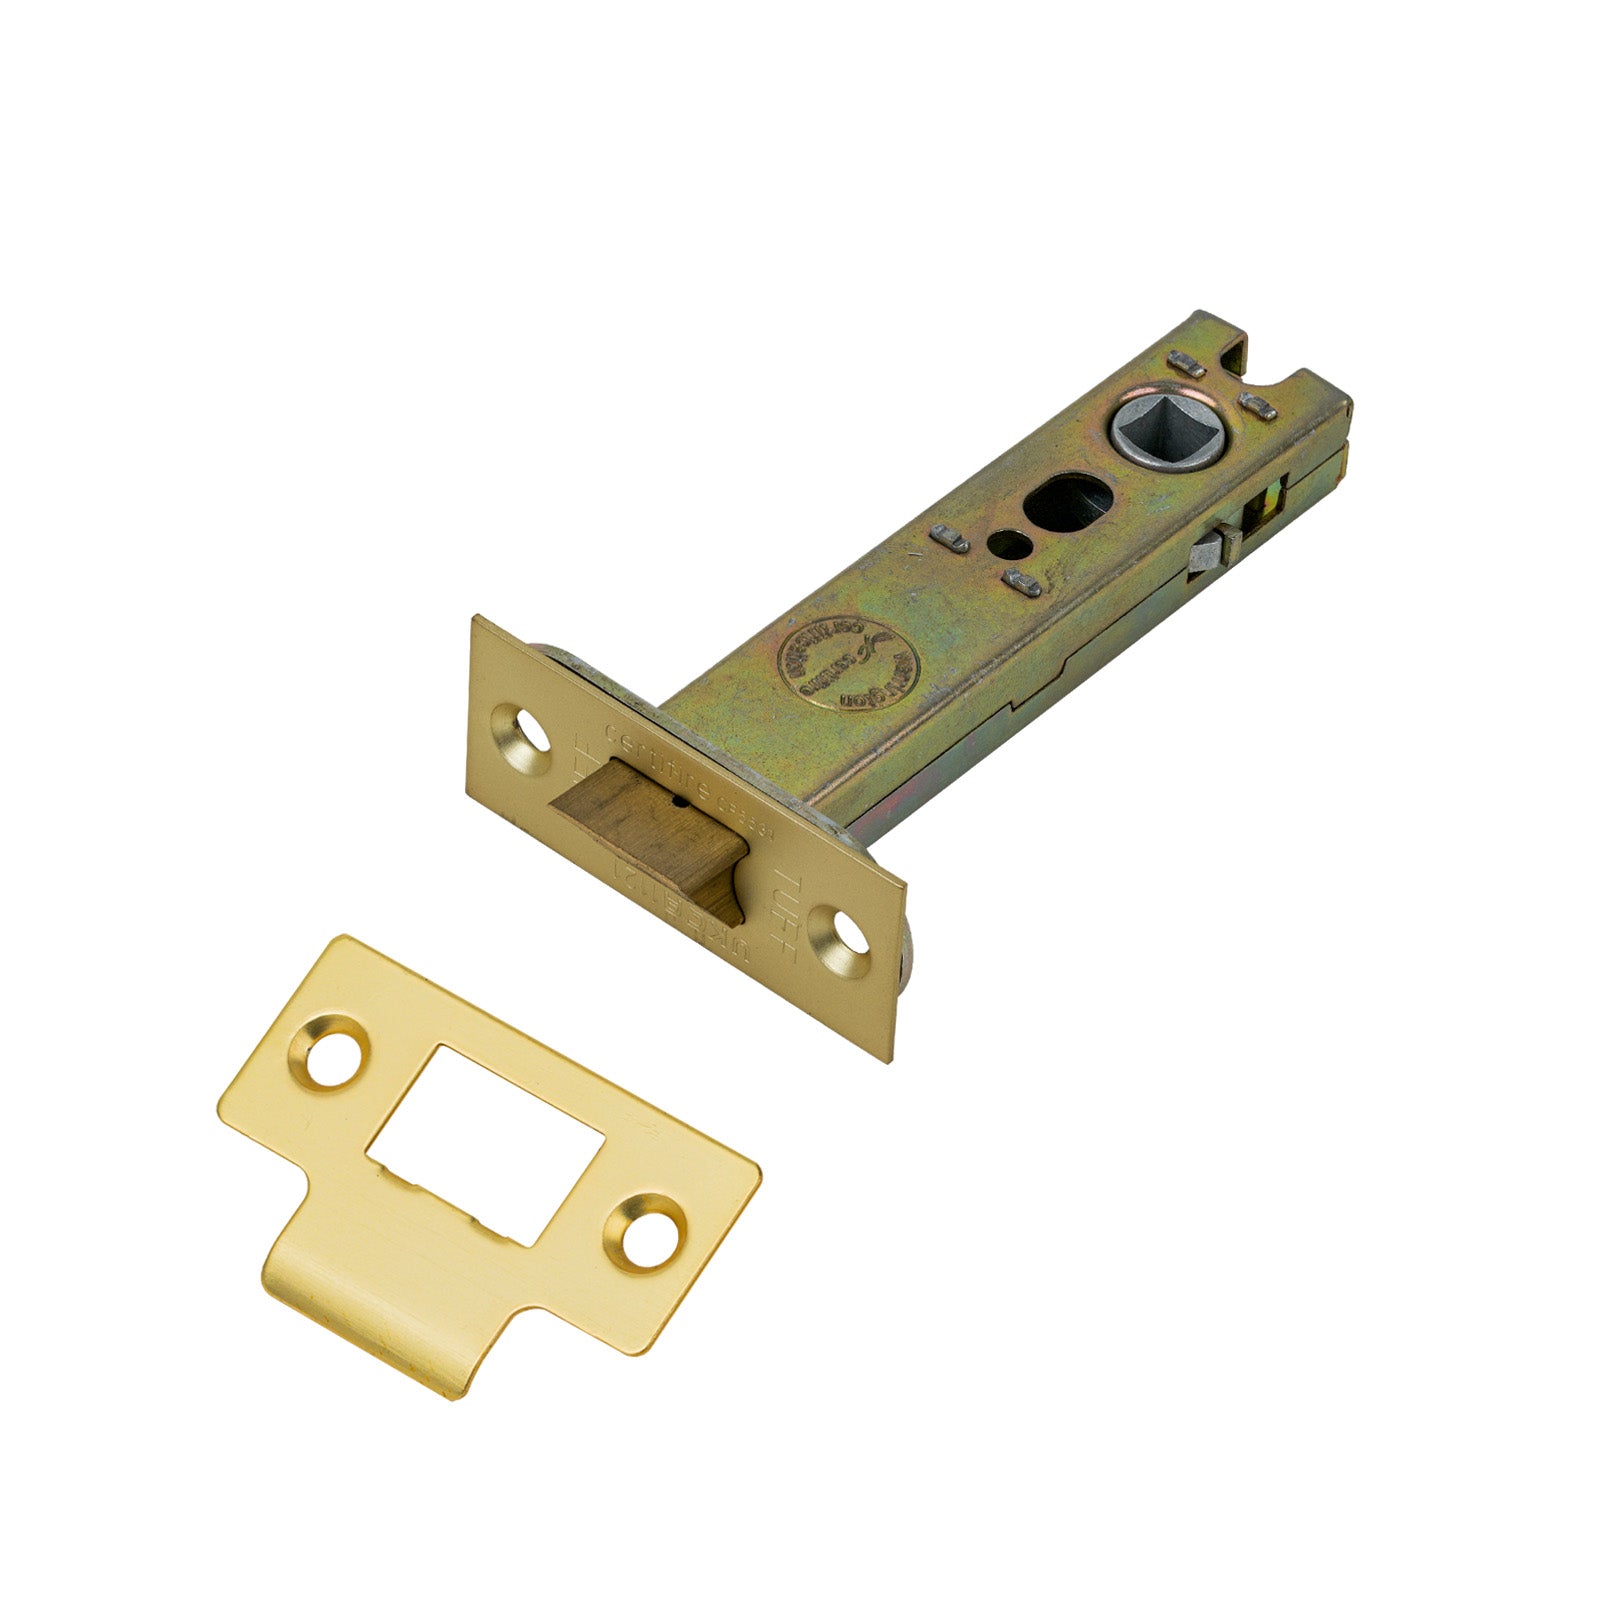 SHOW Heavy Duty Tubular Latch - 4 Inch with Satin Brass finished forend and striker plate